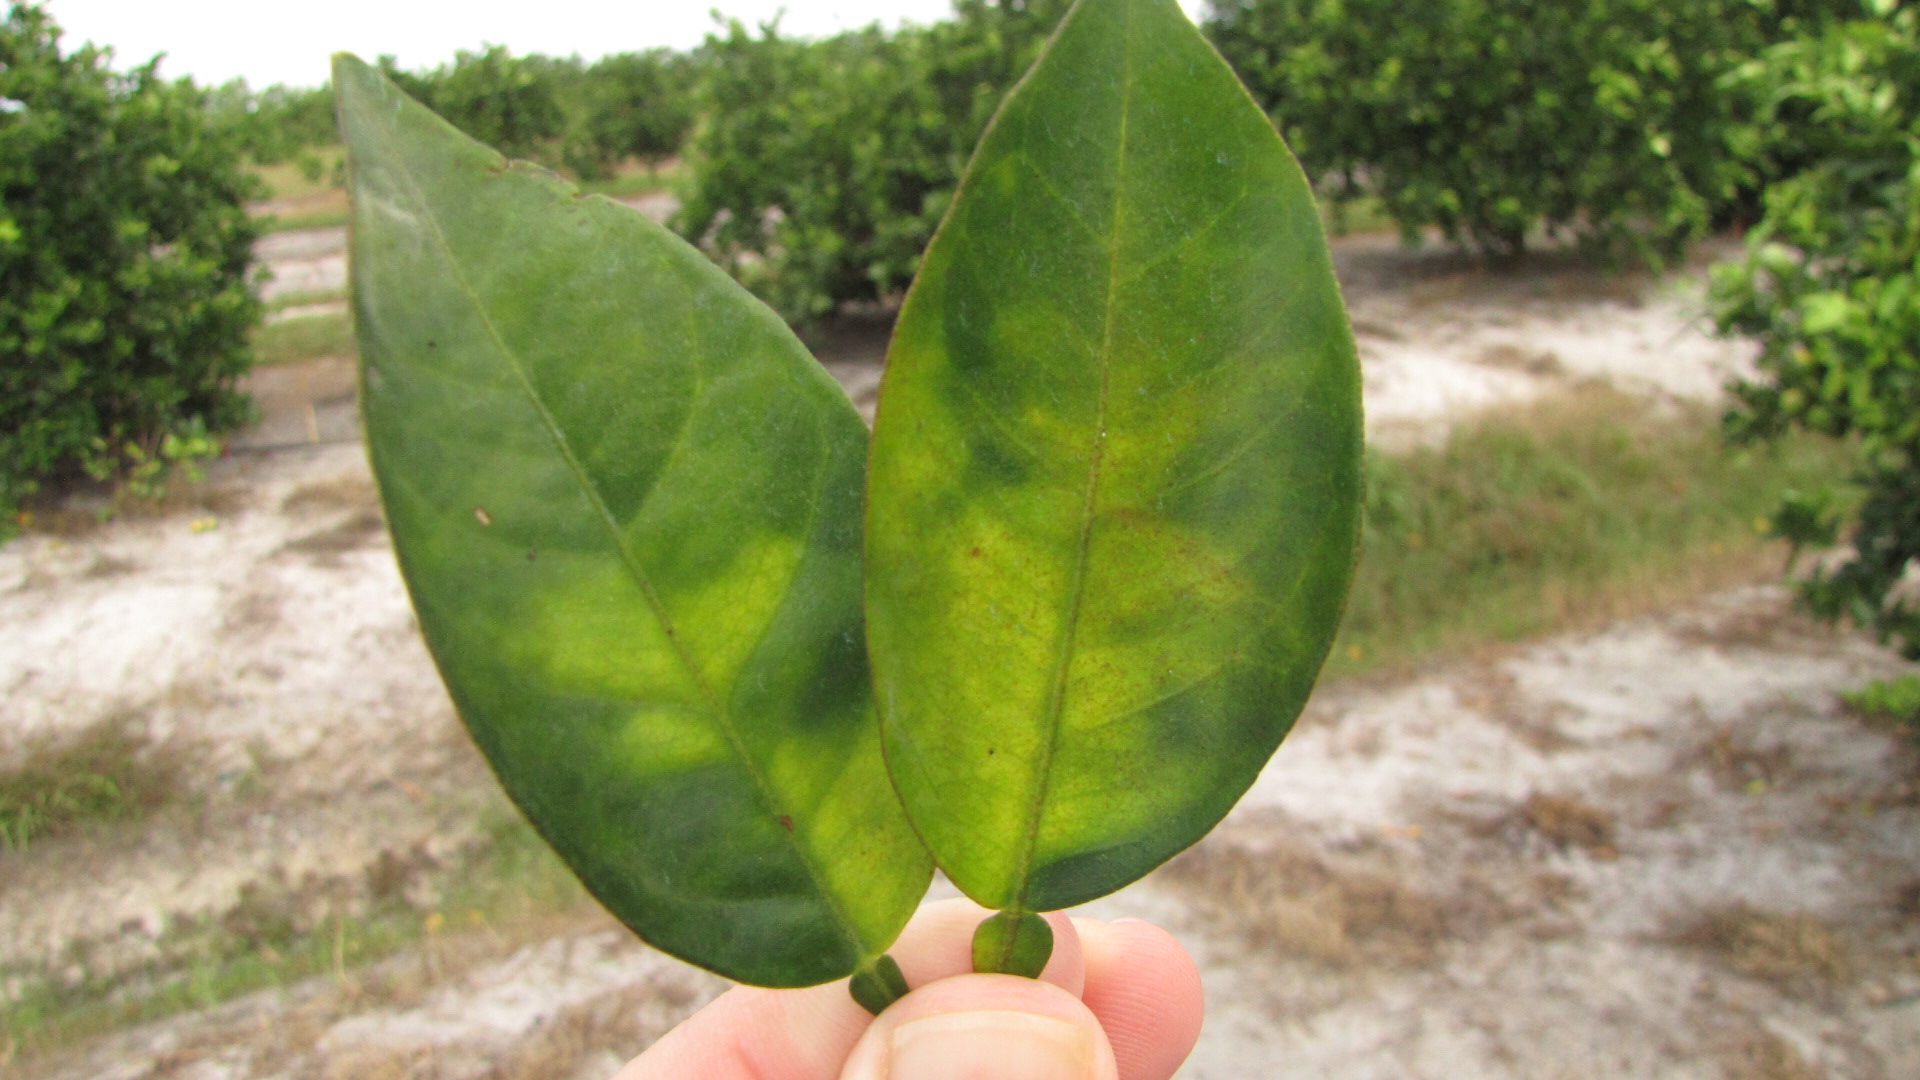 Prevention, management tips offered for citrus disease found in Harris